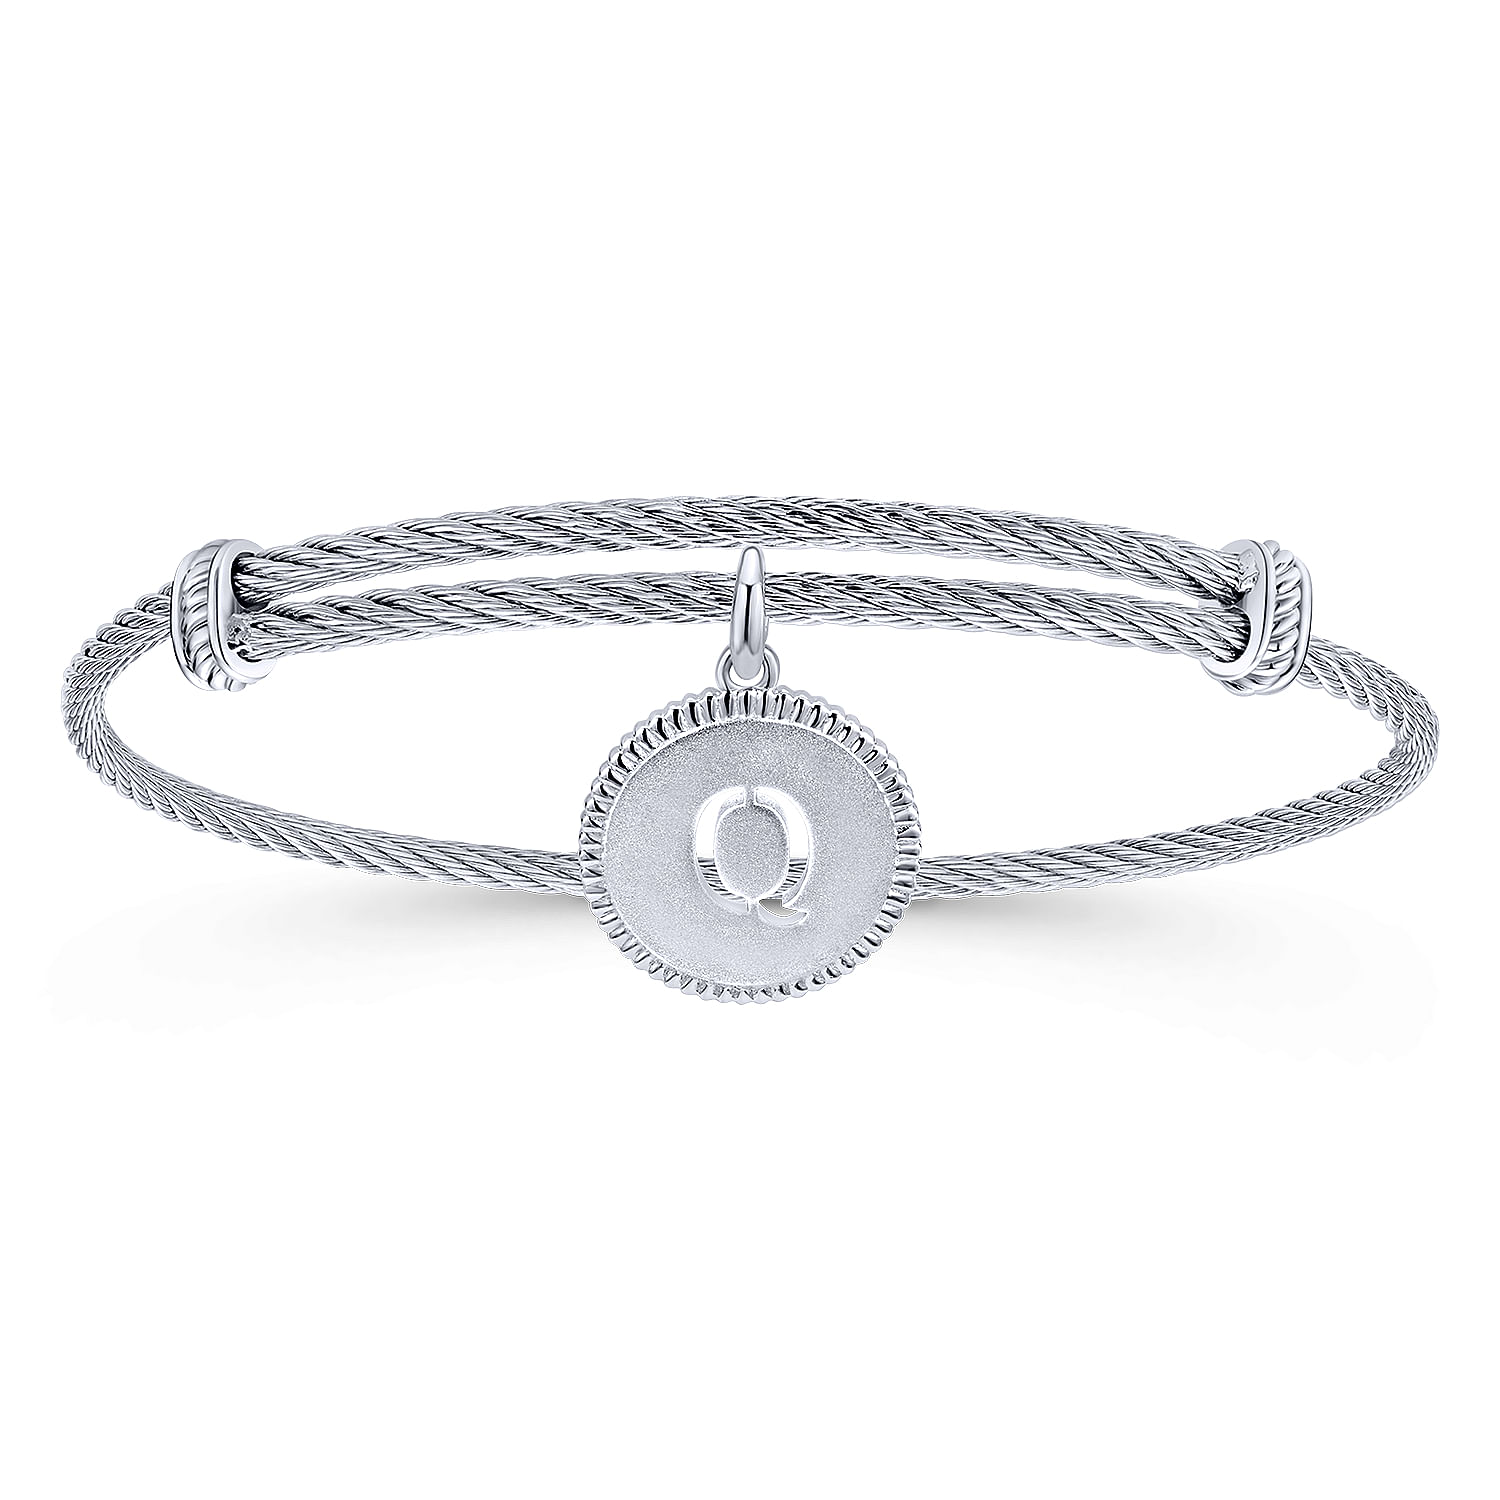 Adjustable Twisted Cable Stainless Steel Bangle with Sterling Silver Q Initial Charm